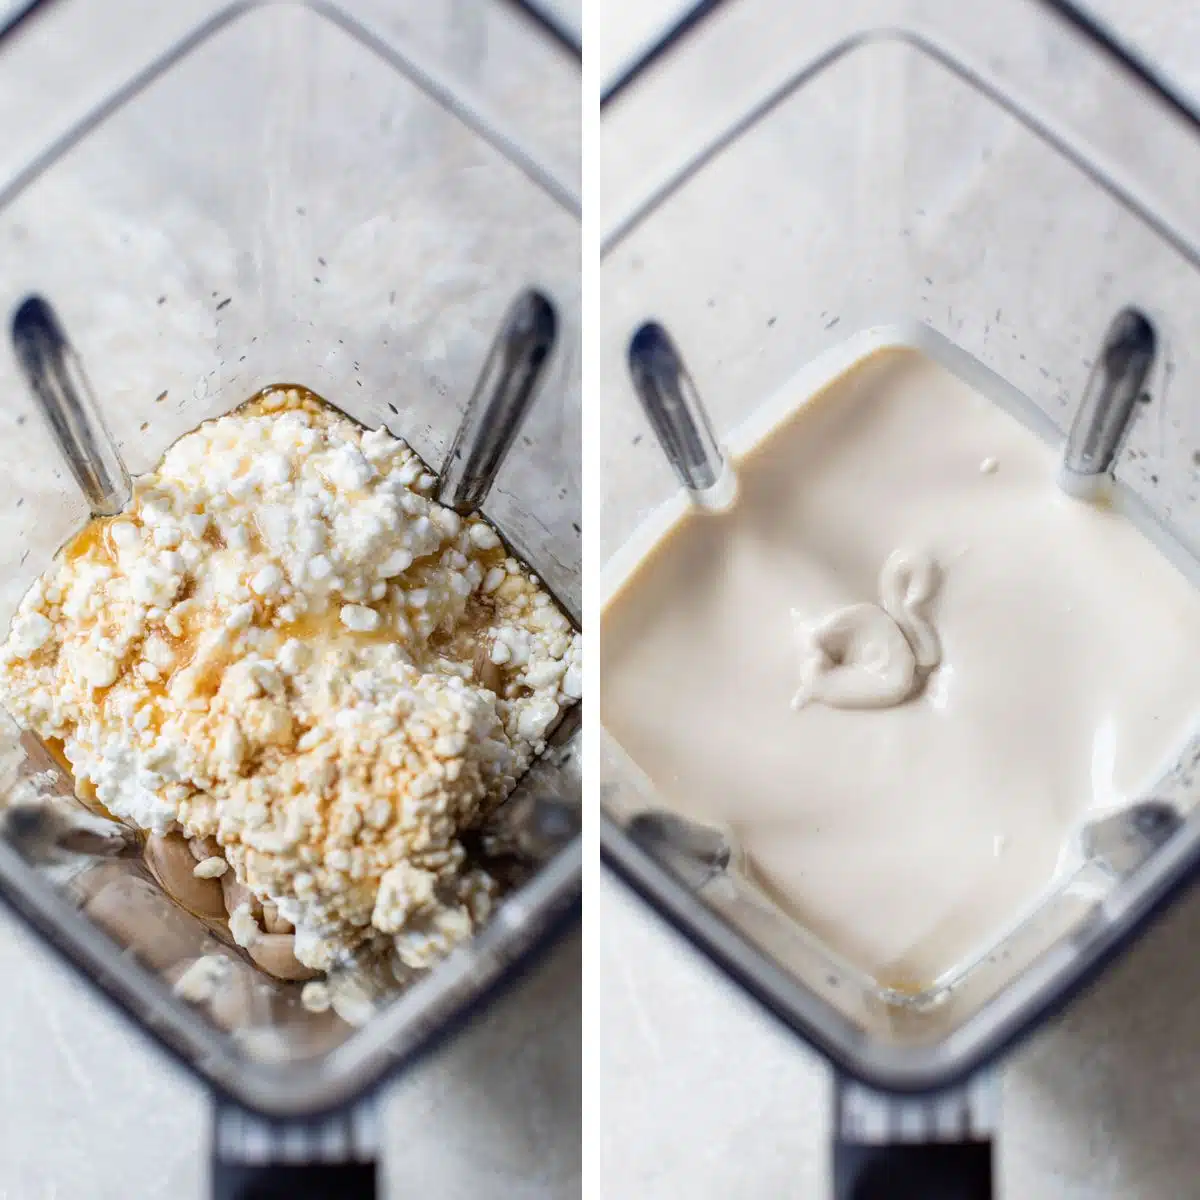 2 images: the left image shows cheesecake ingredients added to a blender and the right image shows those ingredients blended together until smooth